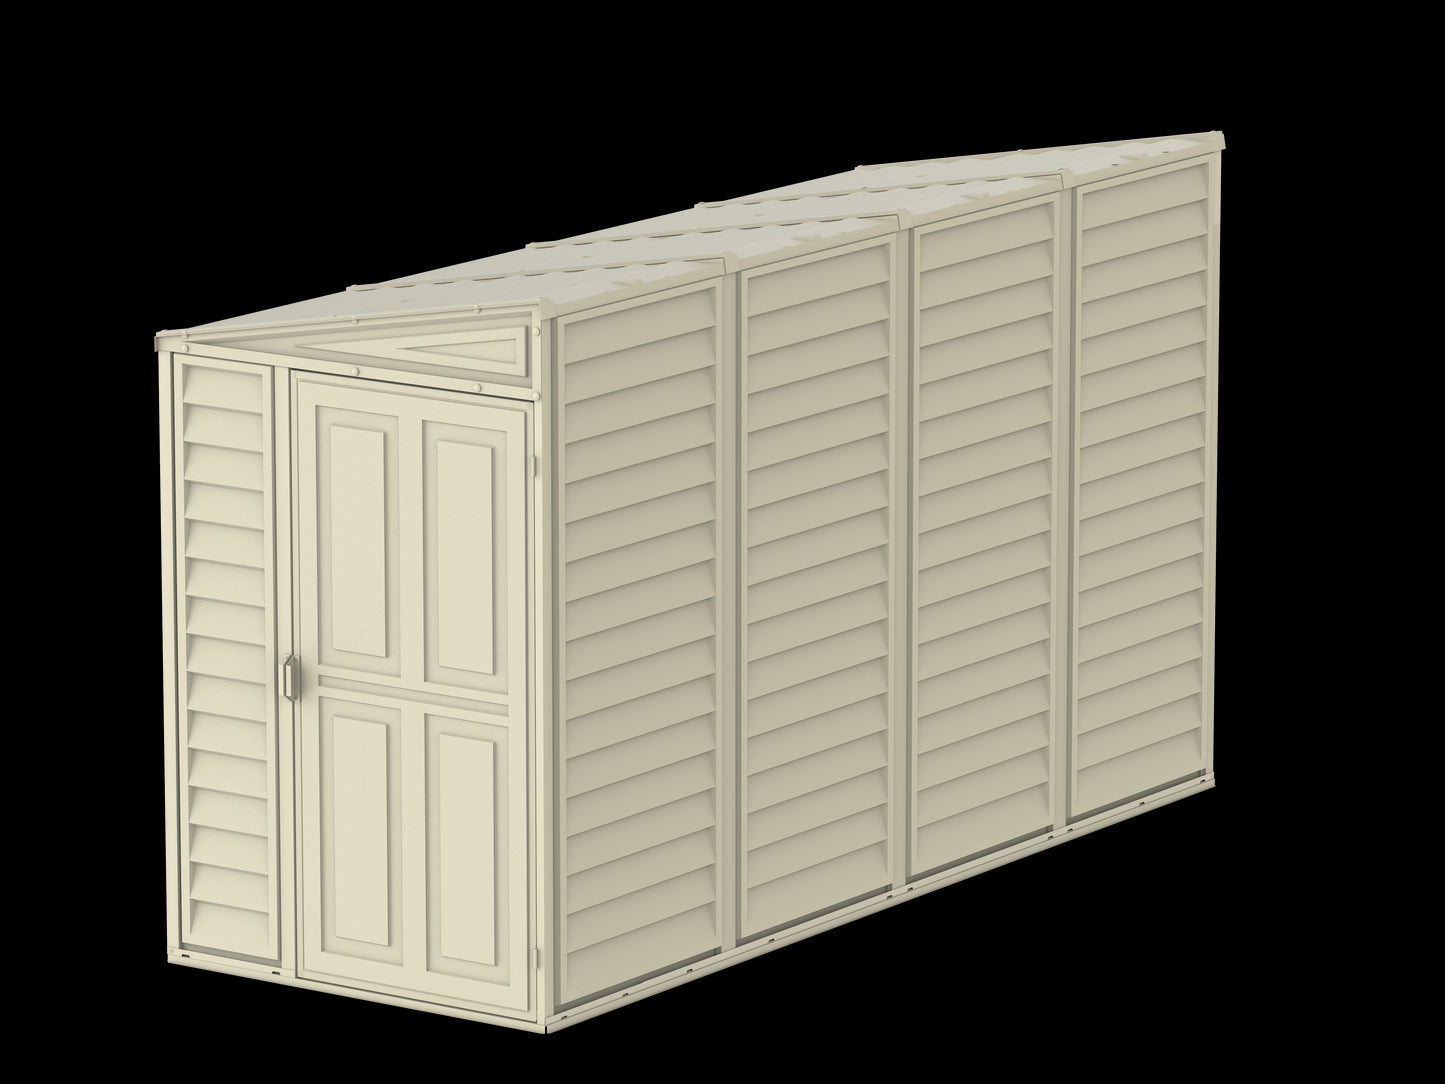 Duramax 4x10 Sidemate Shed w/foundation 06725 backside view